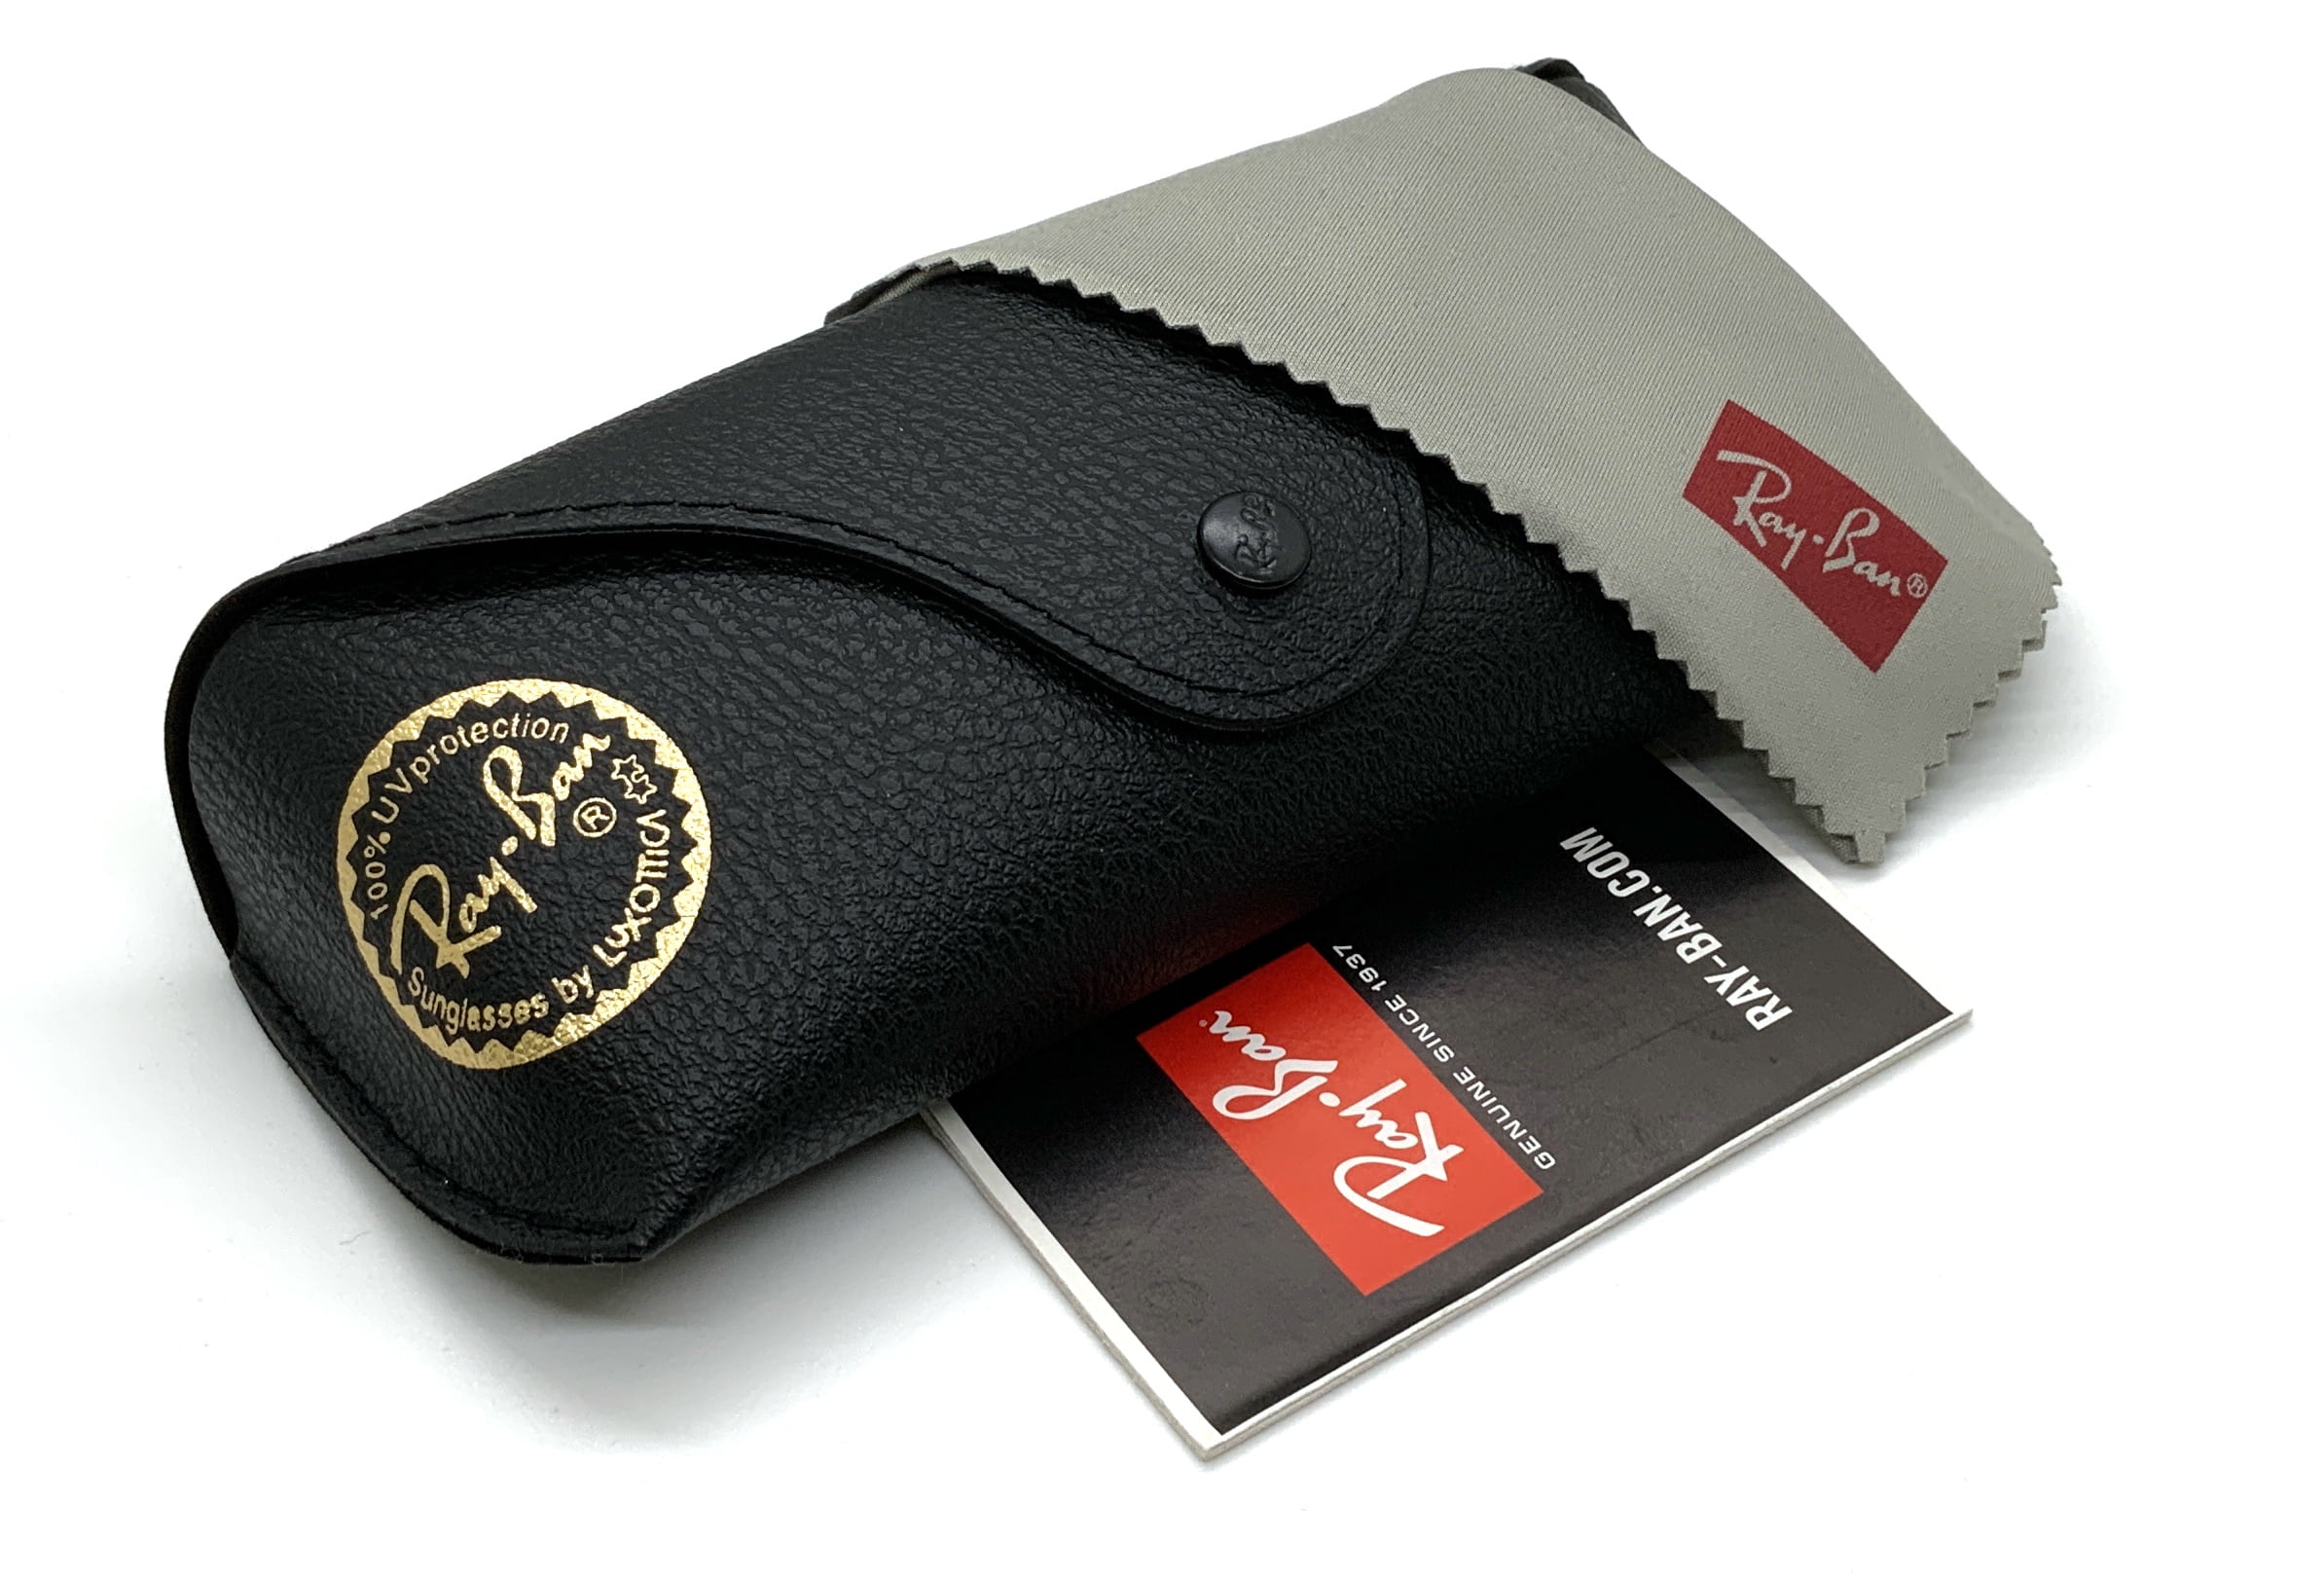 Buy Ray-Ban Premium Black Leather Sunglasses Case for Men and Women - Universal  Fit Slim & Modern Sunglasses Pouch Eyeglass Case Online at Lowest Price in  Ubuy Mexico. 912212218